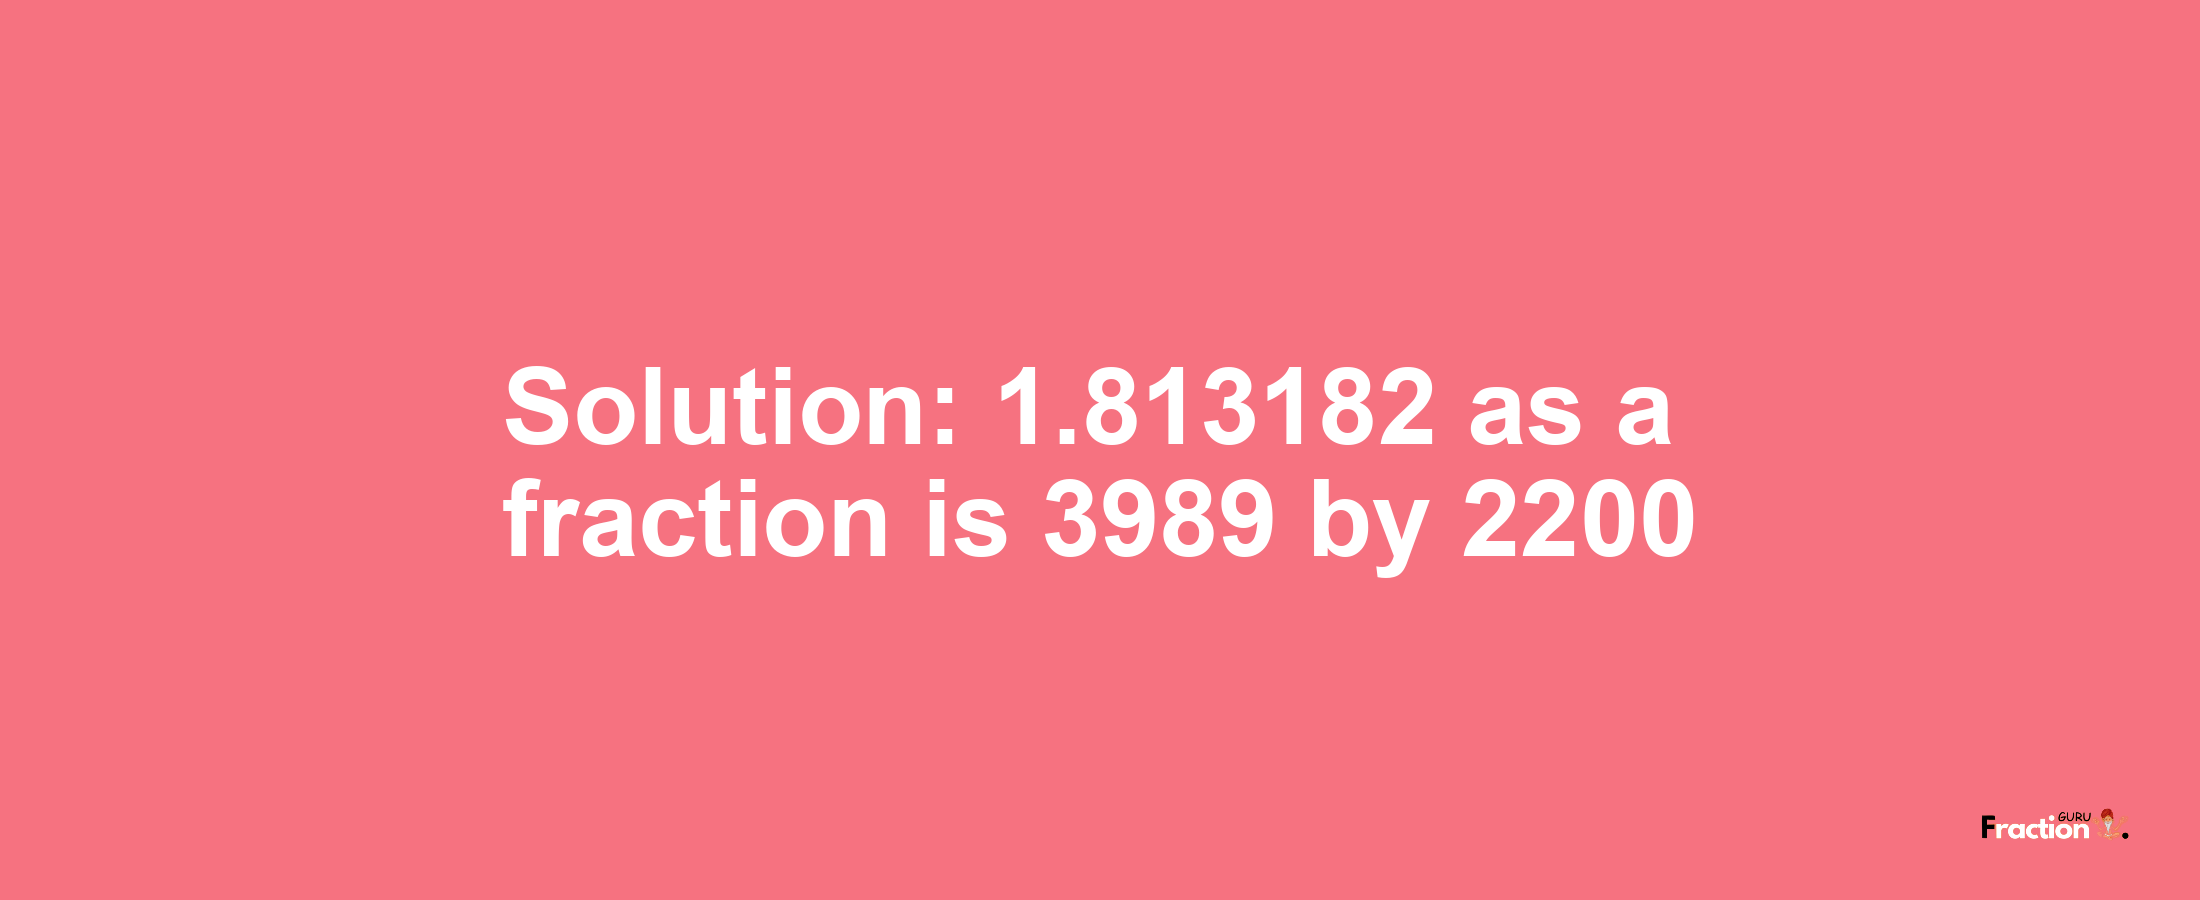 Solution:1.813182 as a fraction is 3989/2200